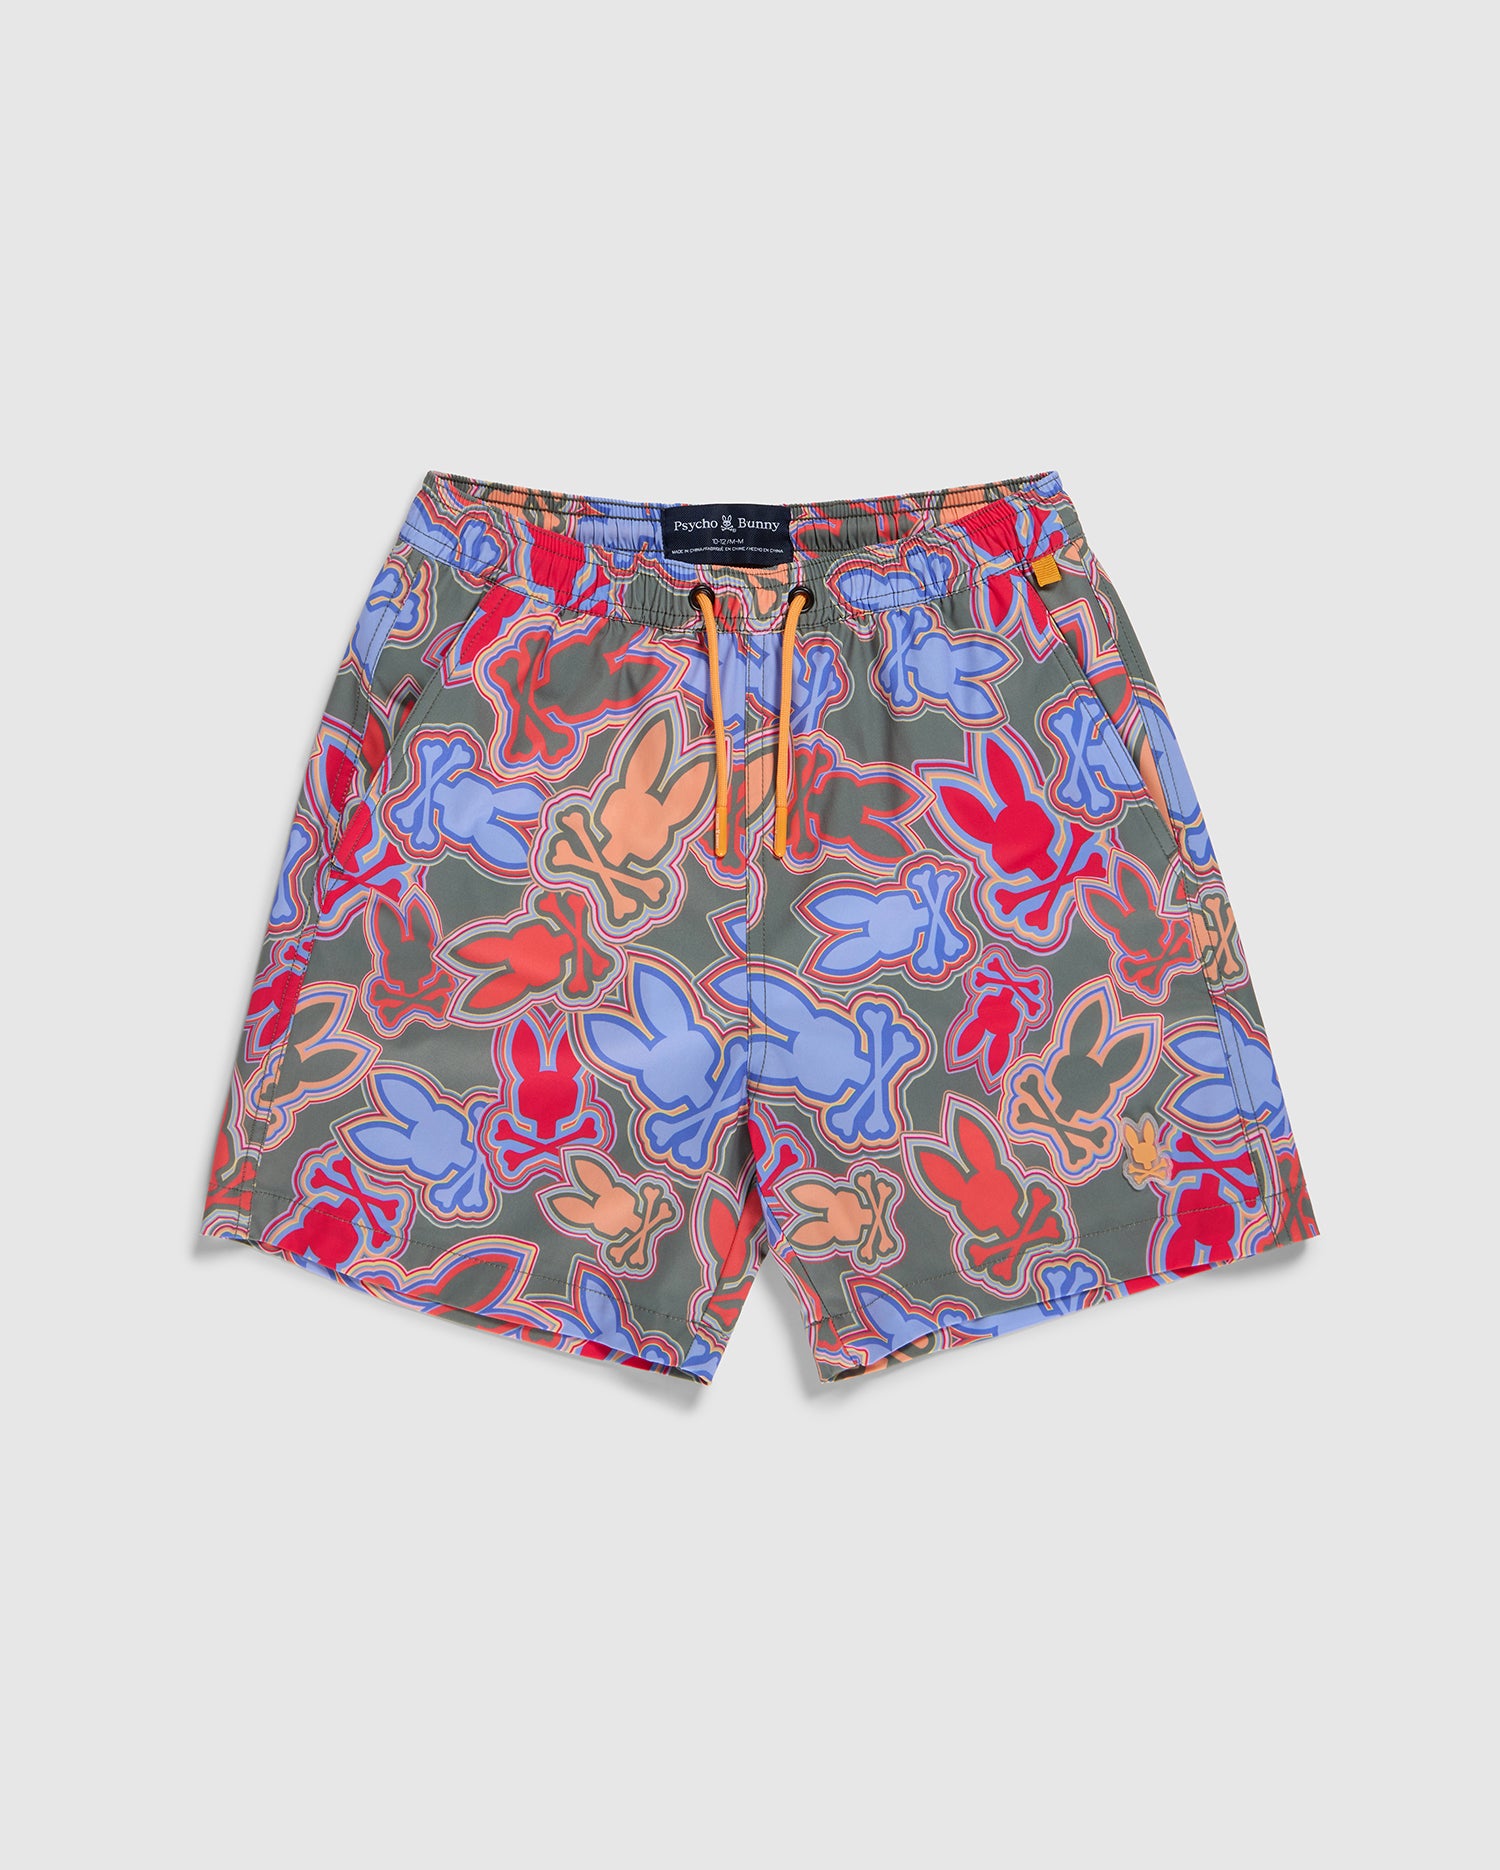 Bright, vibrantly patterned swim shorts featuring colorful overlapping abstract designs in shades of blue, purple, pink, and orange. Made from recycled polyester, the KIDS JACKSON SWIM TRUNK - B0W370B2SW by Psycho Bunny are quick-dry kids' swim trunks with an elastic waistband with an orange drawstring and a black label above the waistband.